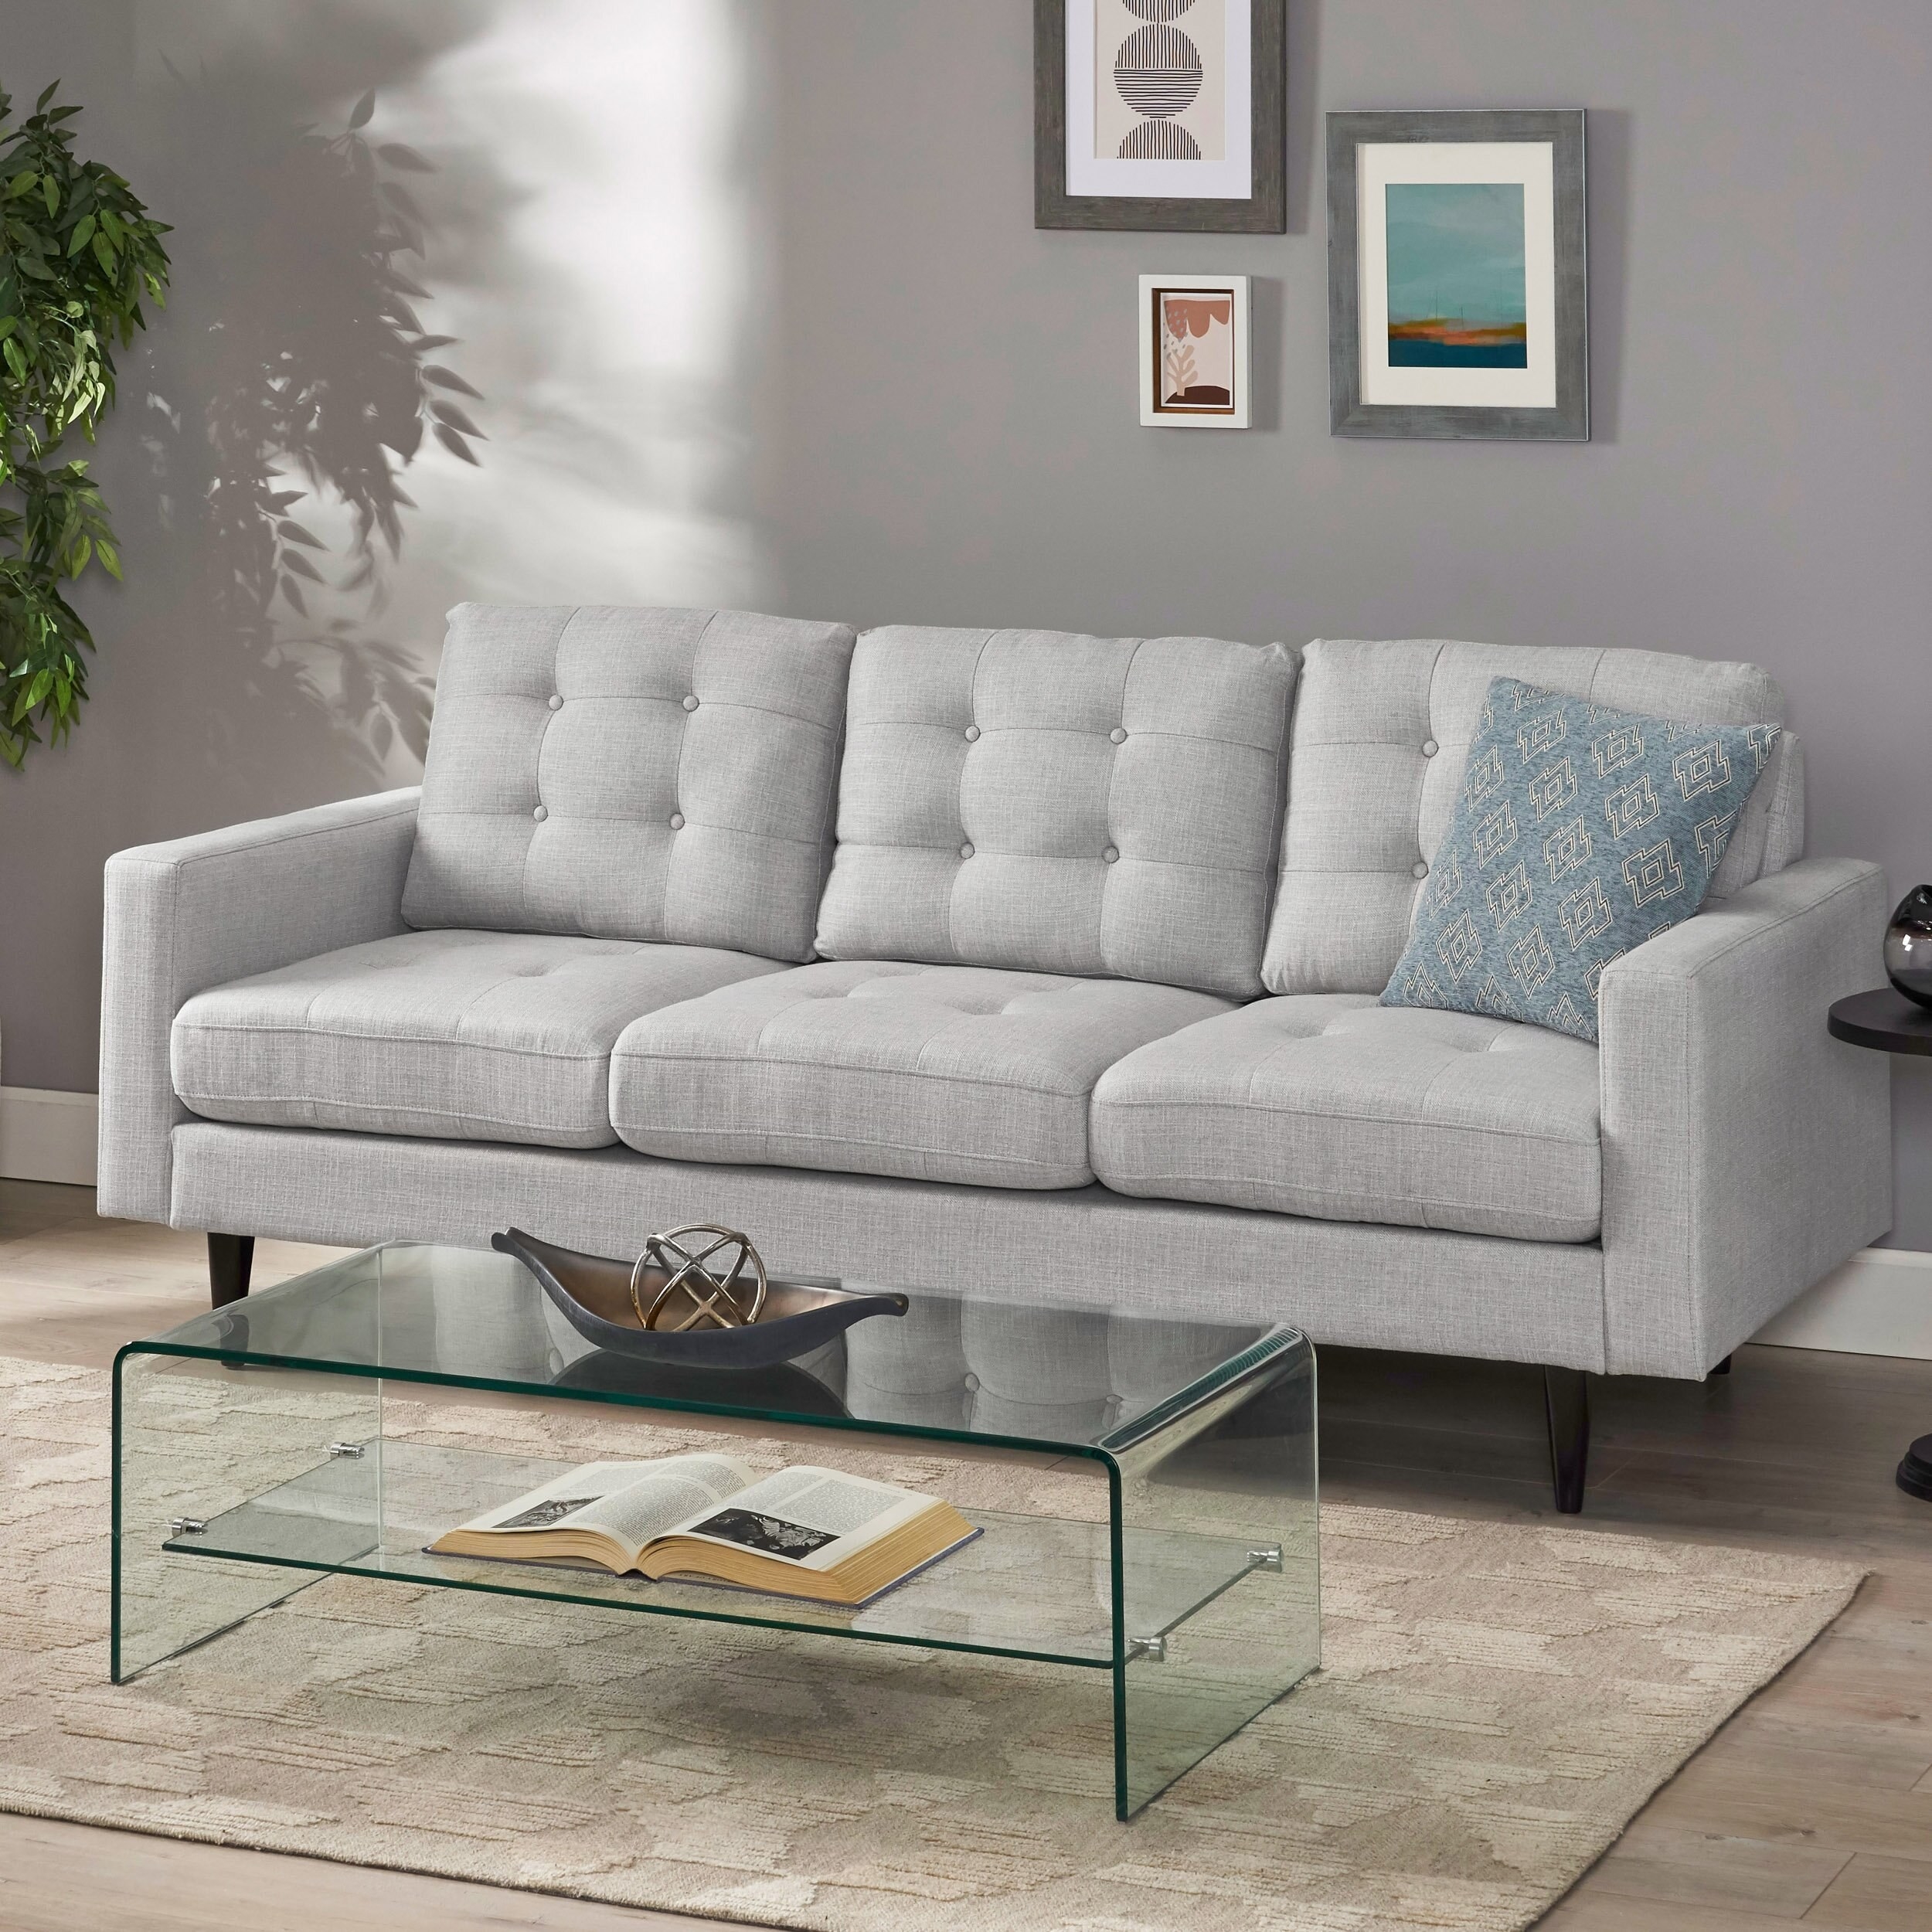 the sofa in gray with a glass coffee table in front of it